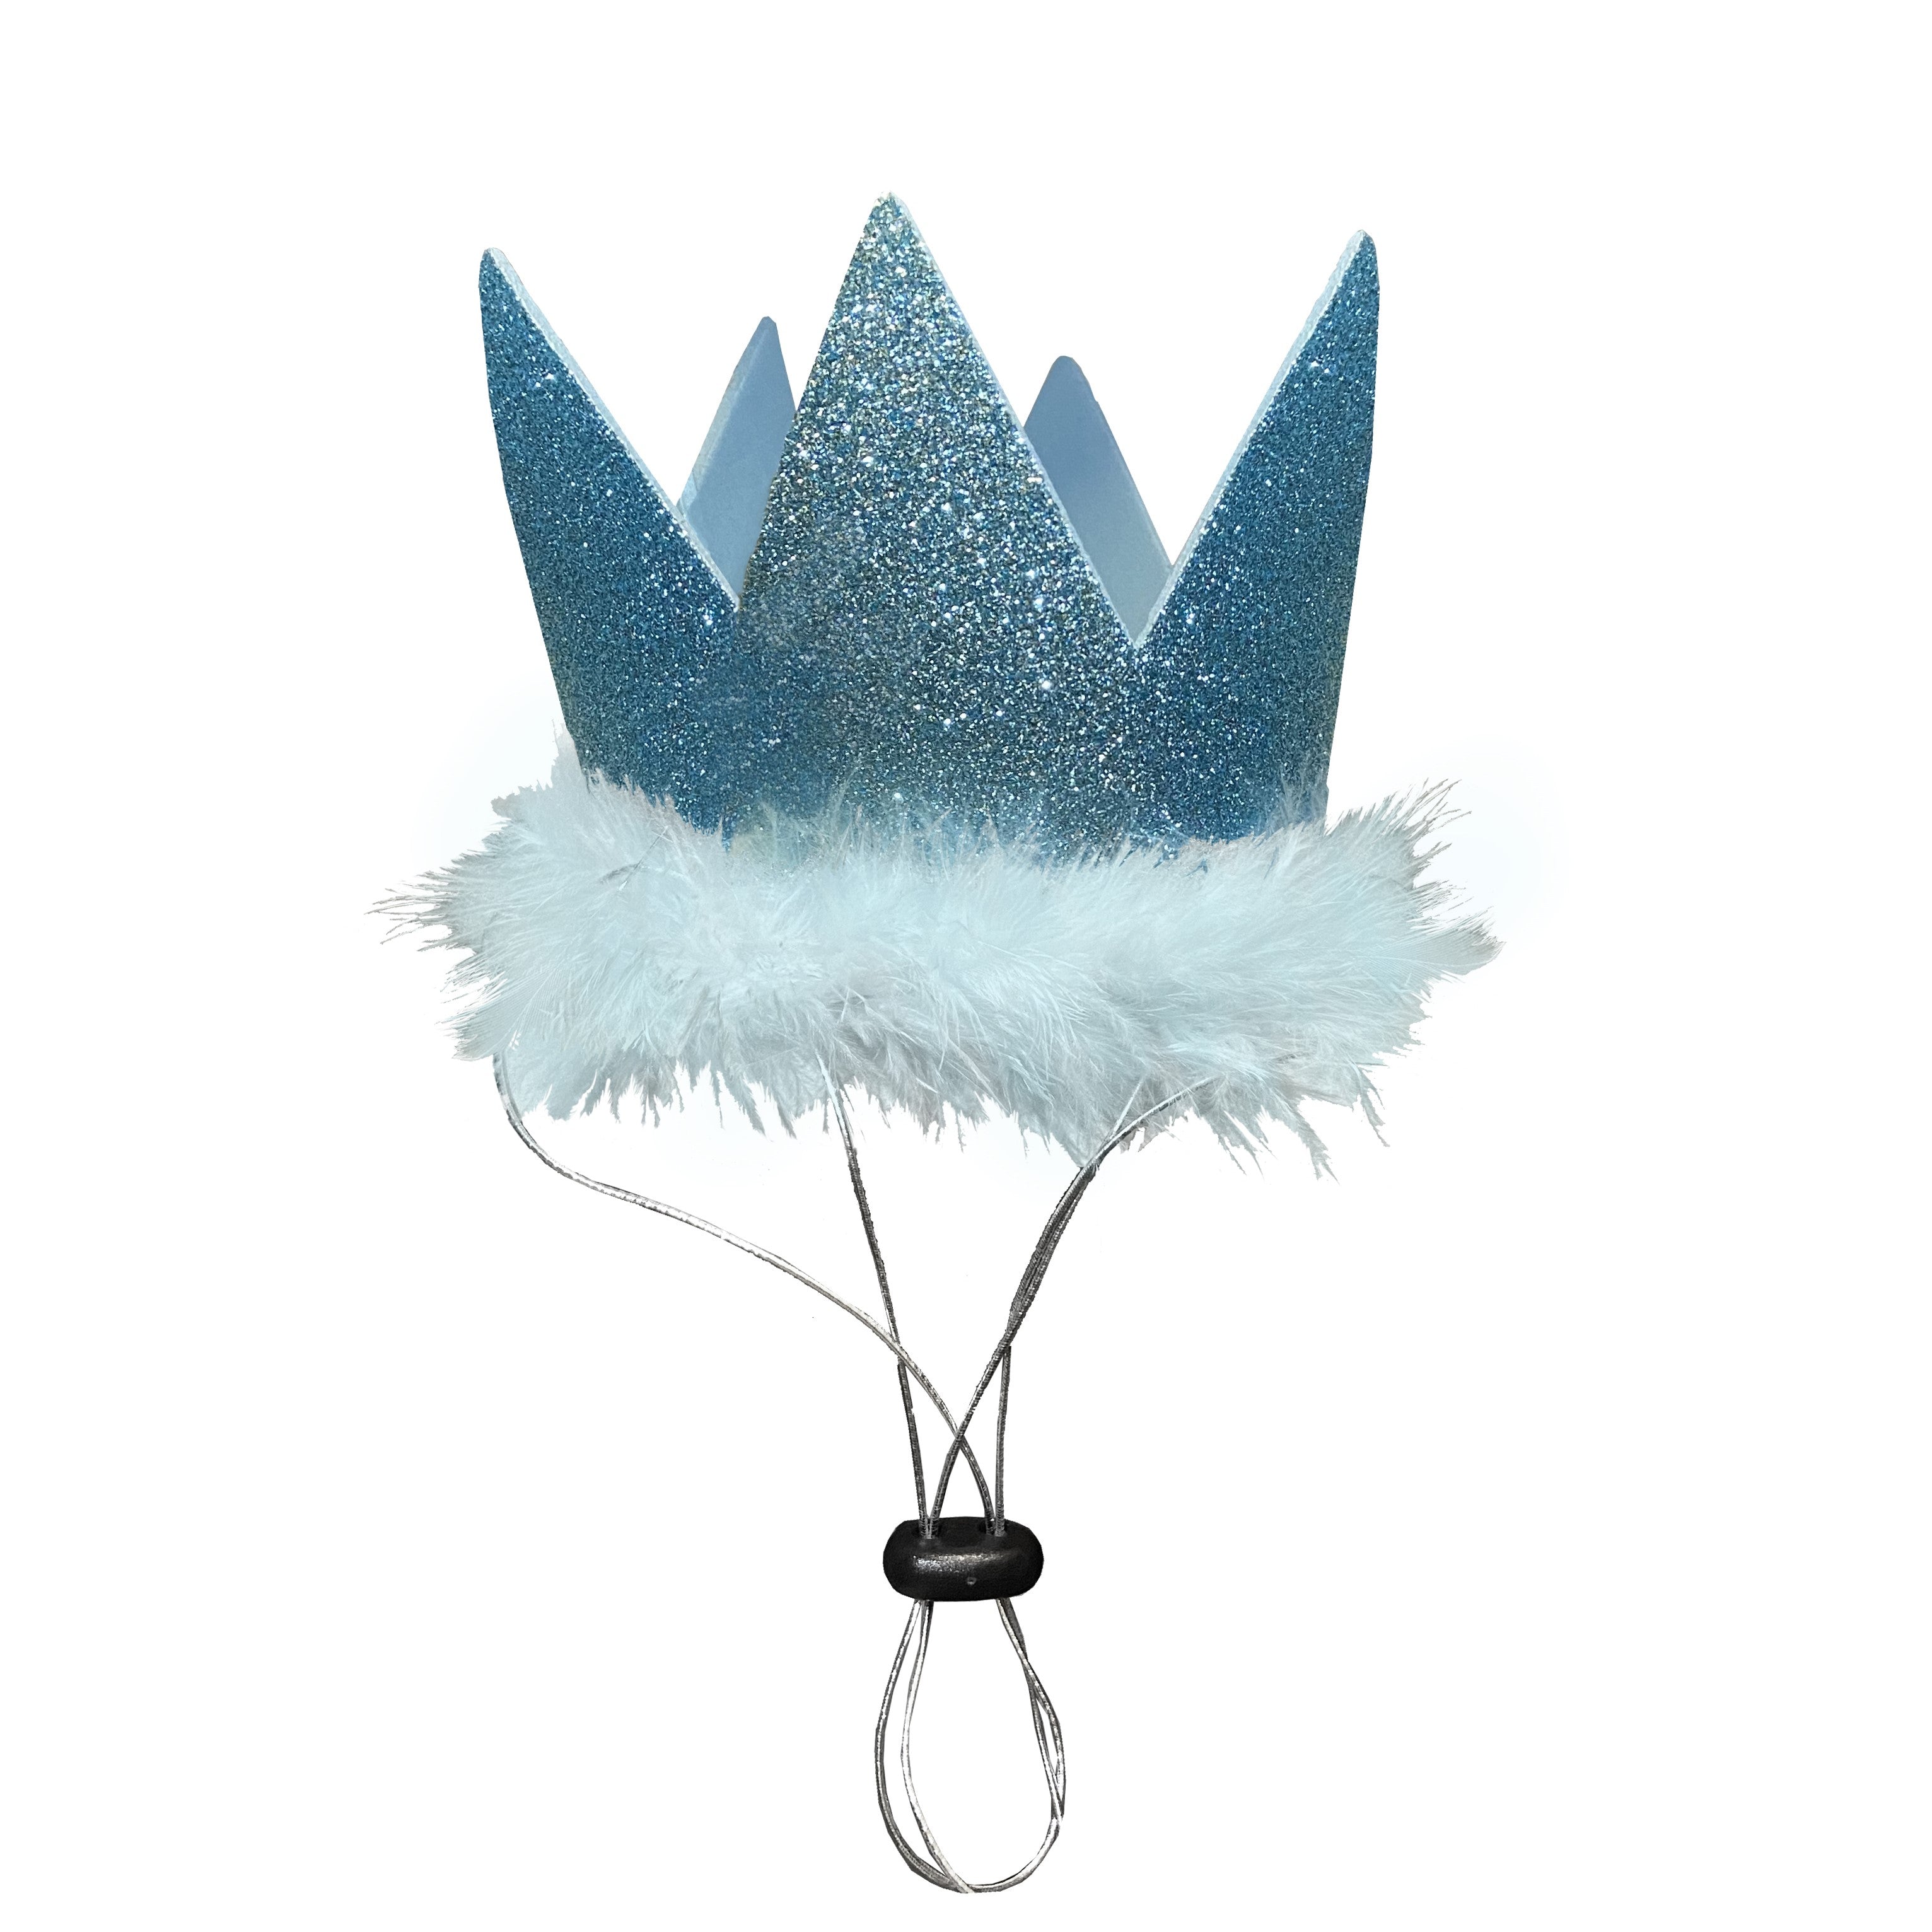 How to make a Frozen Crown